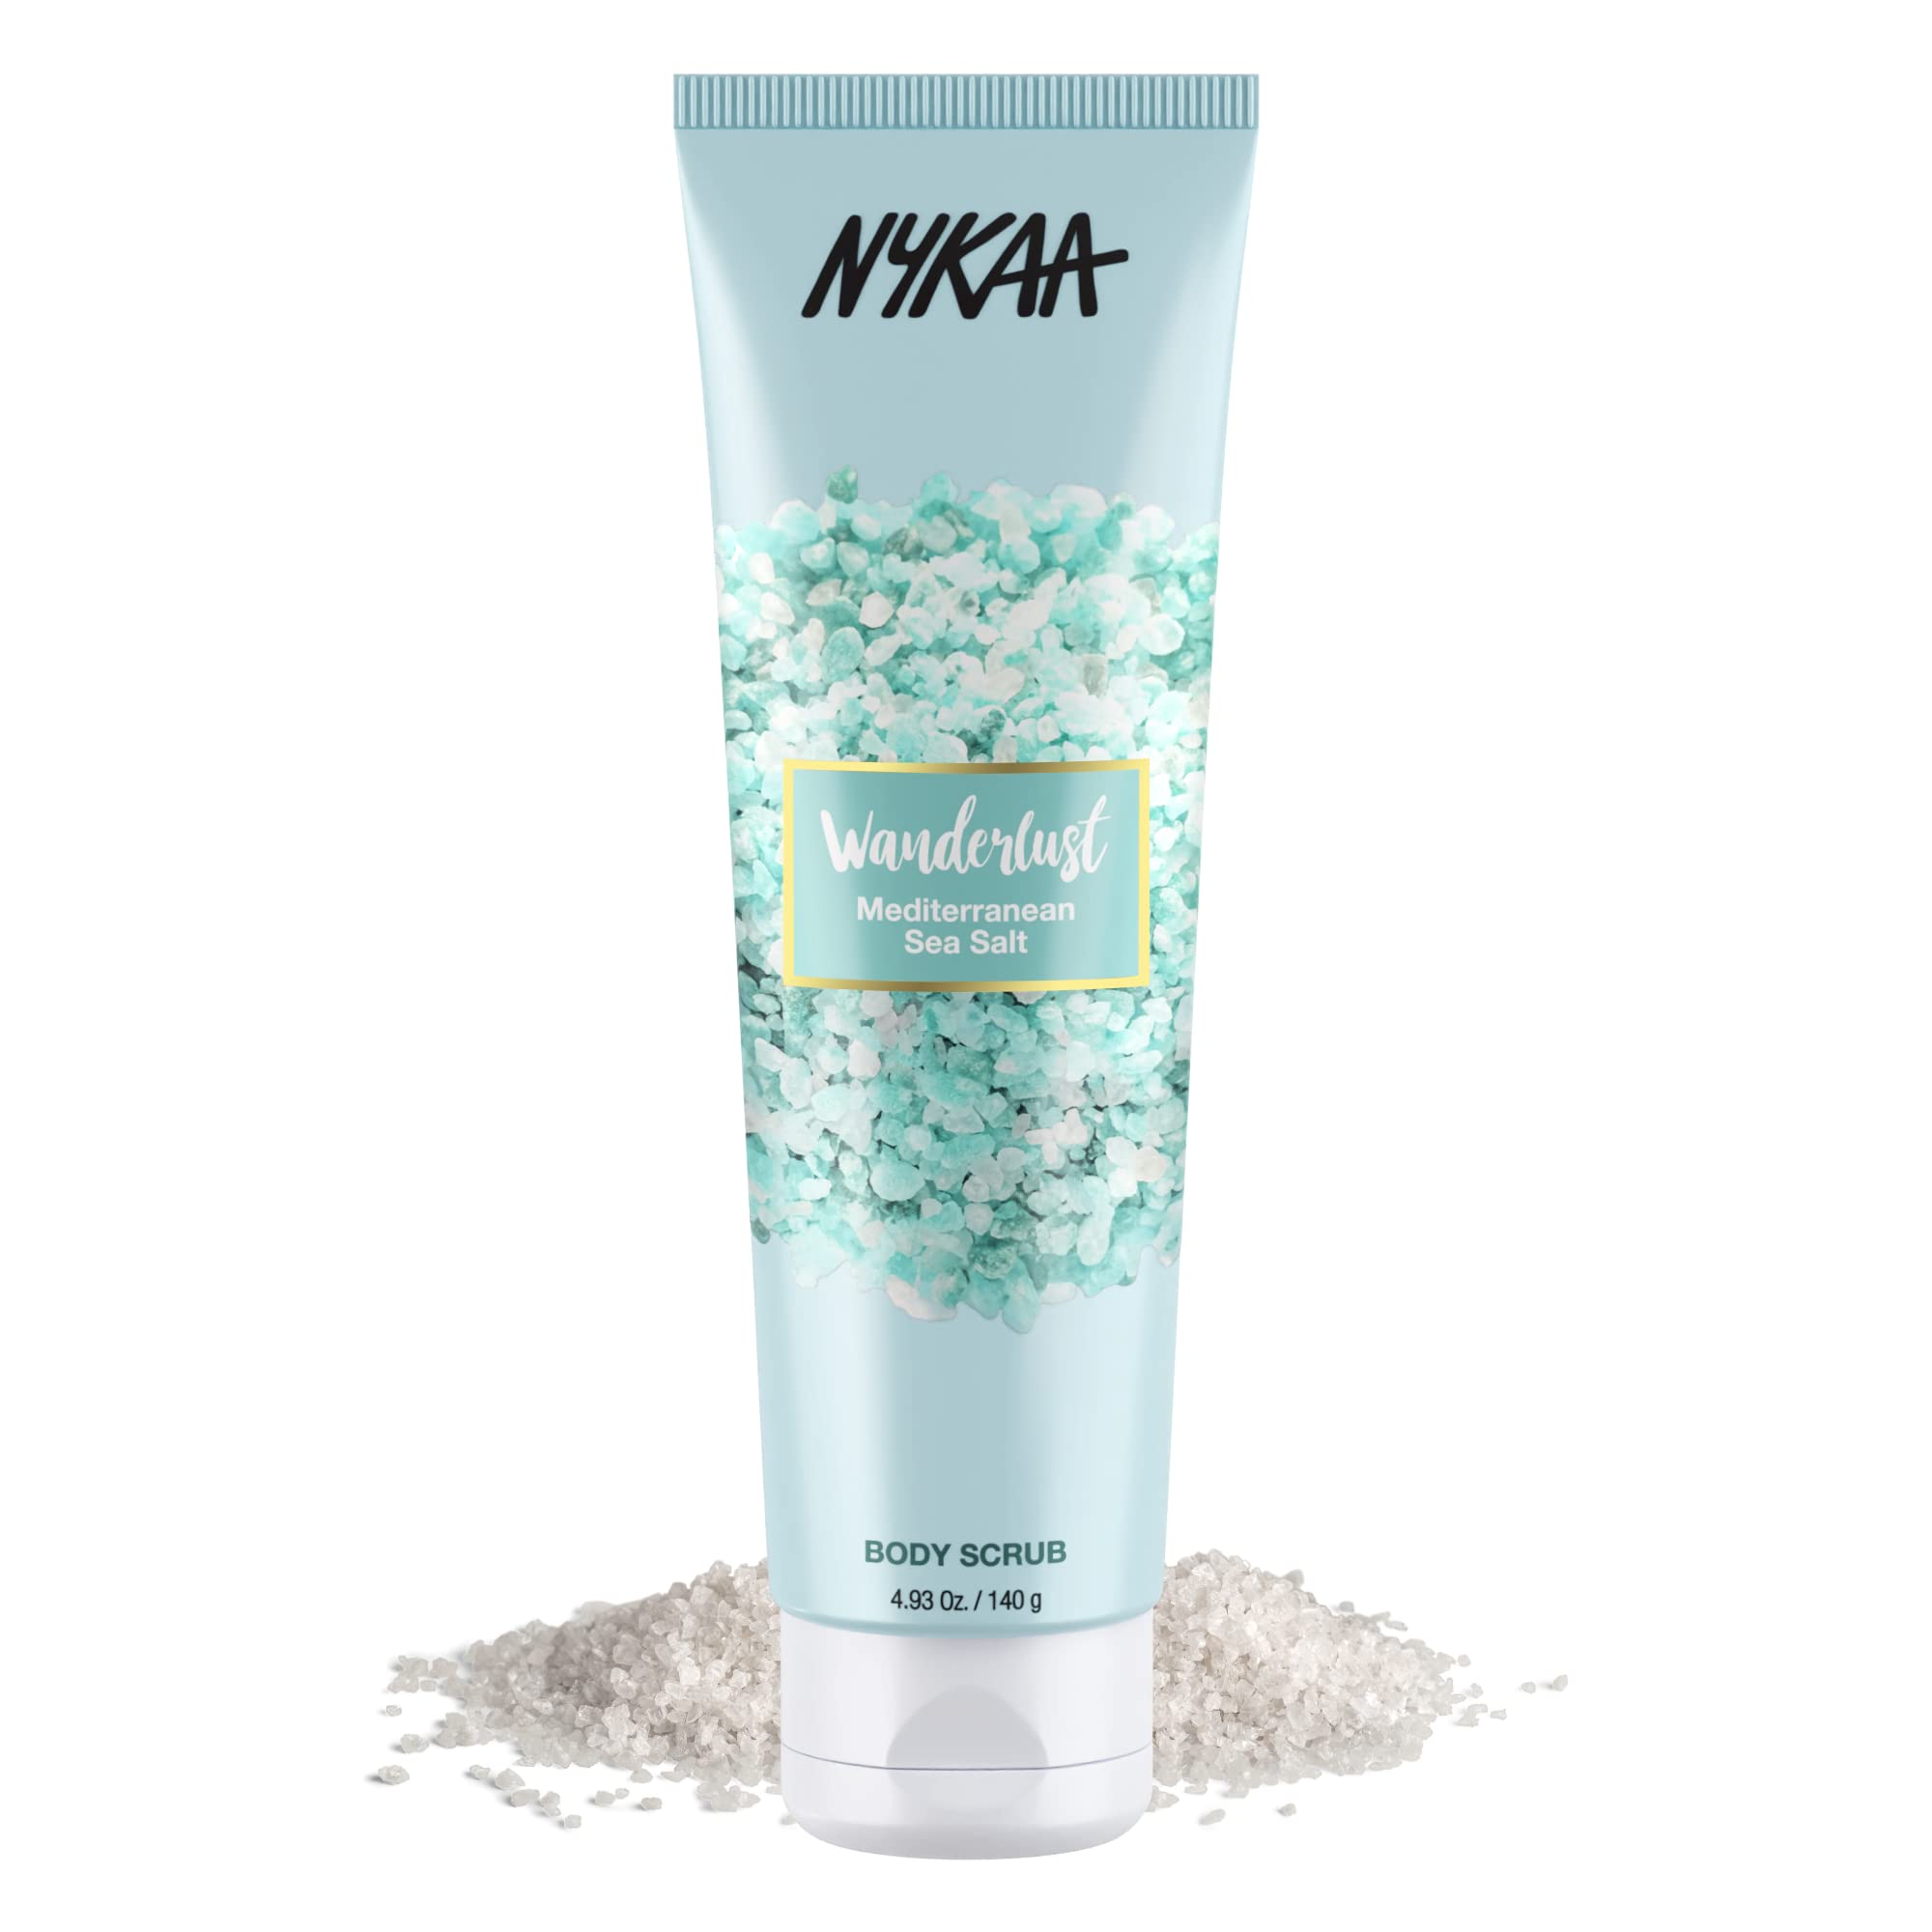 Nykaa Wanderlust Mediterranean Sea Salt Body Scrub - Enriched with Aloe Vera - Prevents Moisture Loss, Reviving Dull and Dry Skin - Sodium and Sulphate Free, Paraben Free - 140gm